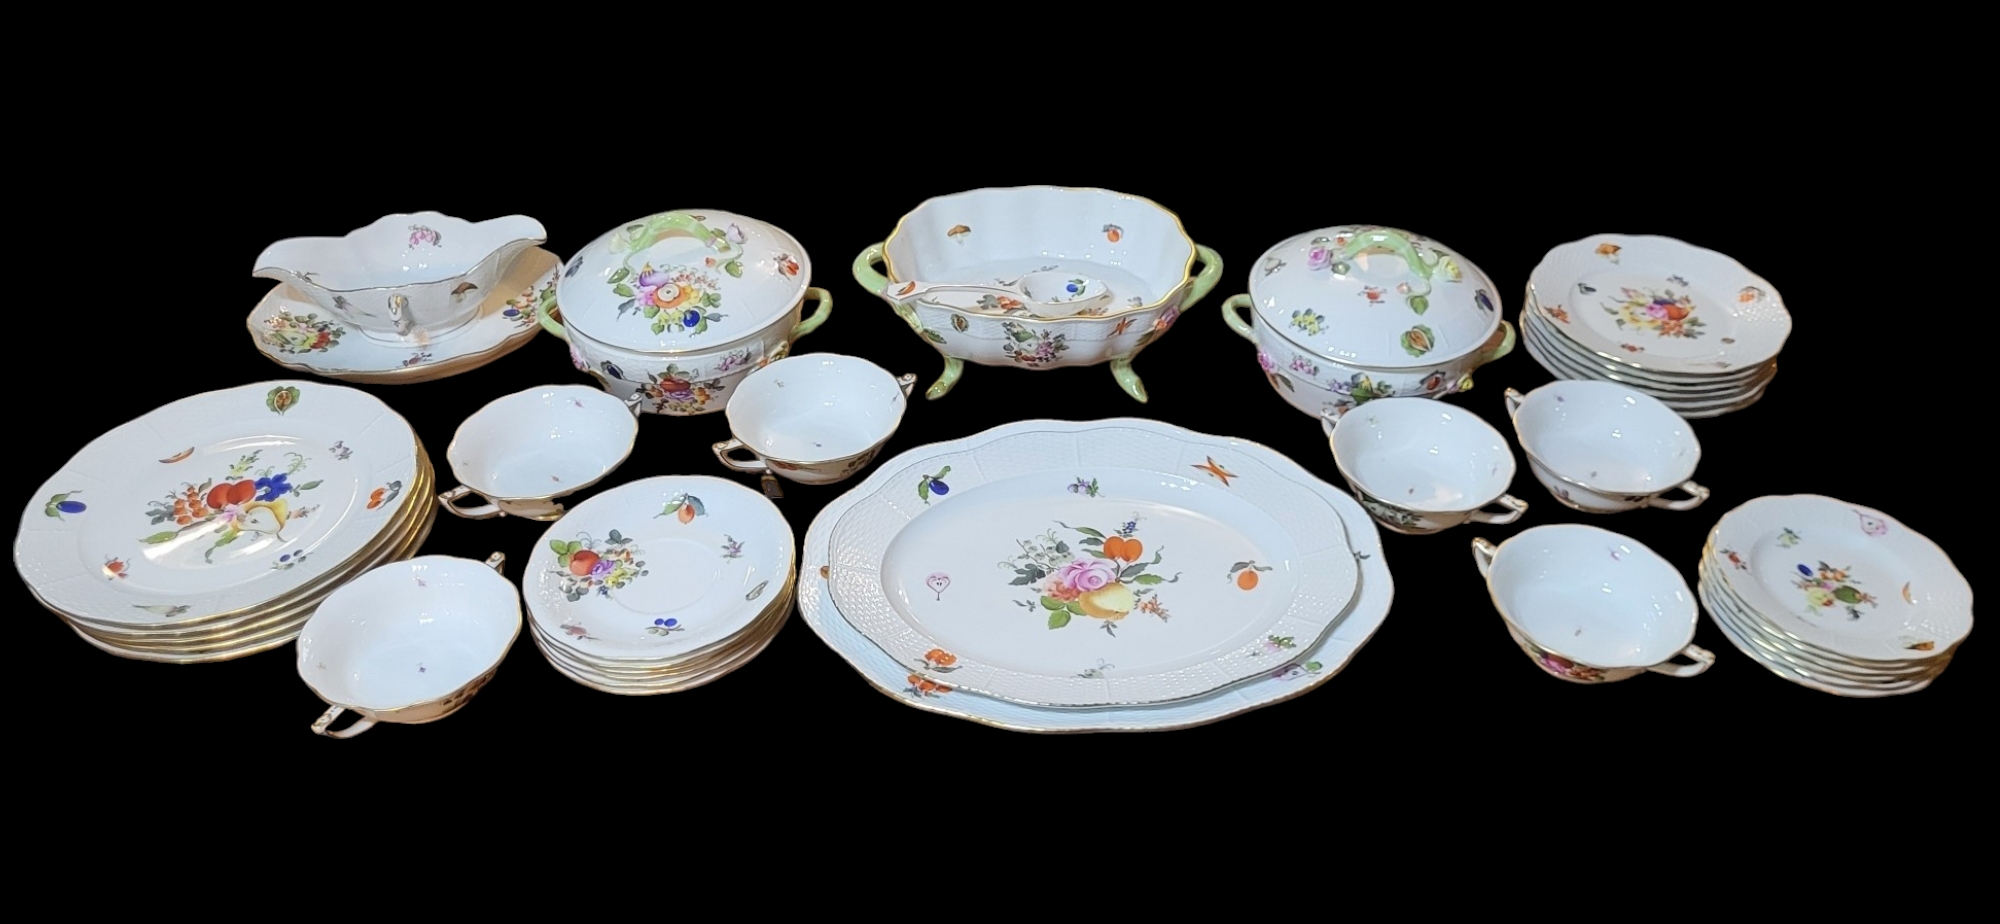 HEREND, A 20TH CENTURY HARD PORCELAIN DINNER SERVICE, CIRCA 1930 Comprising thirty-six pieces in